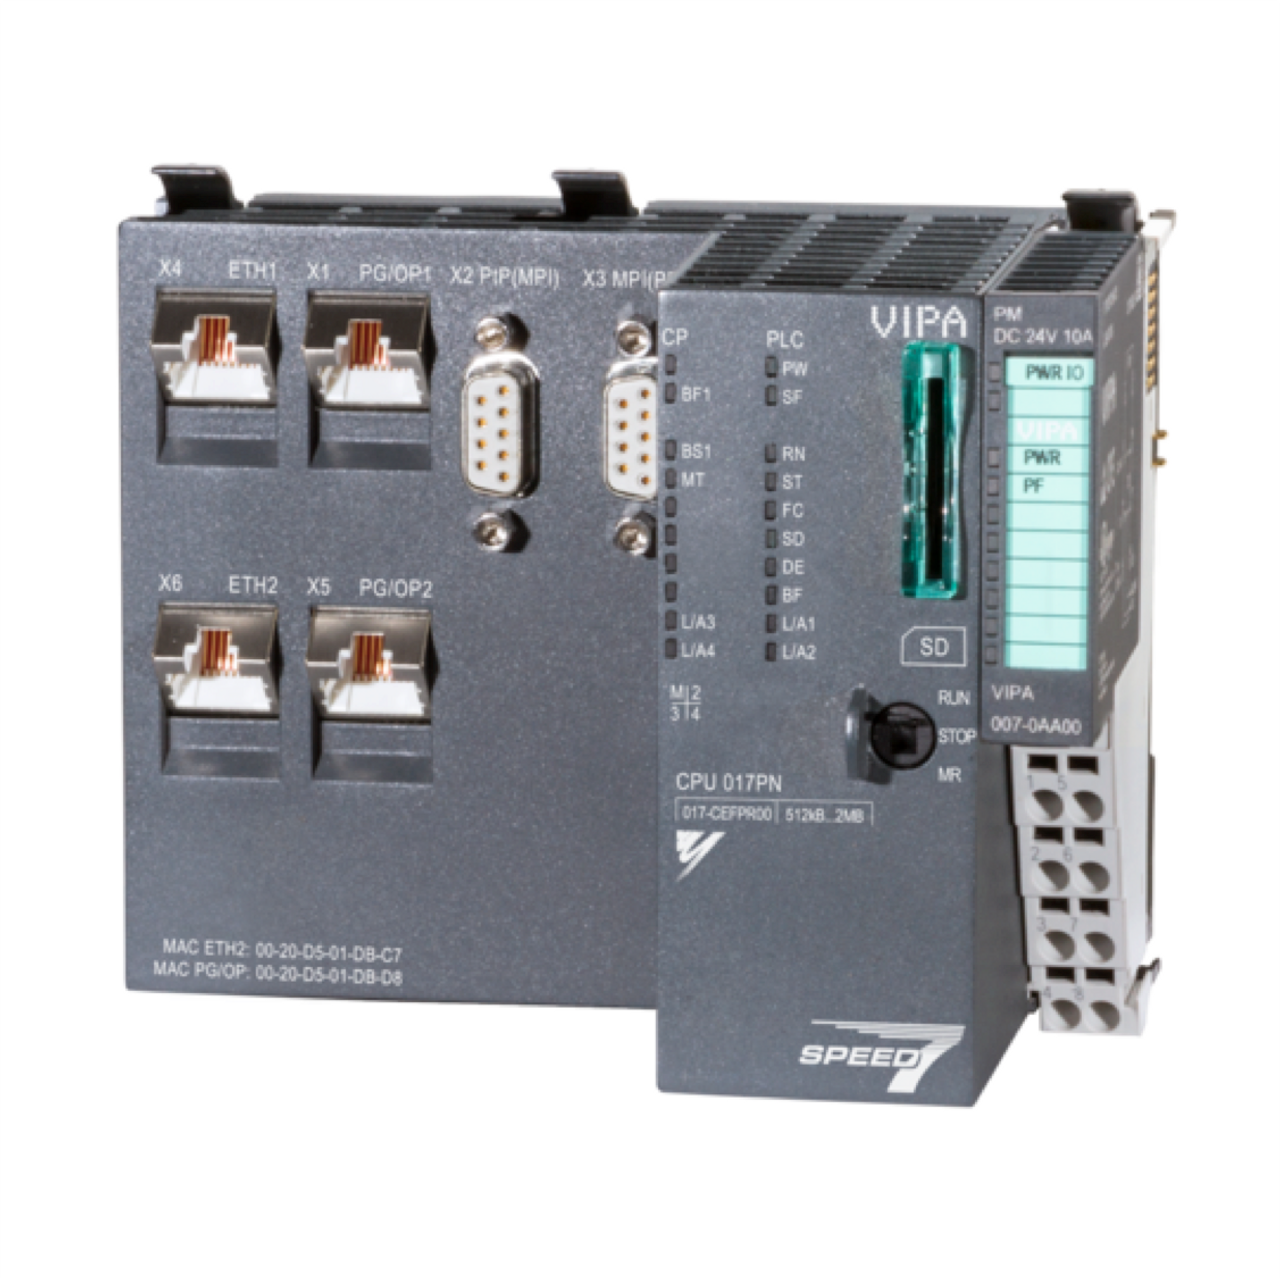 VIPA 017-CEFPR00 SLIO CPU 017PN Compact, flexible and scalable PLC  system